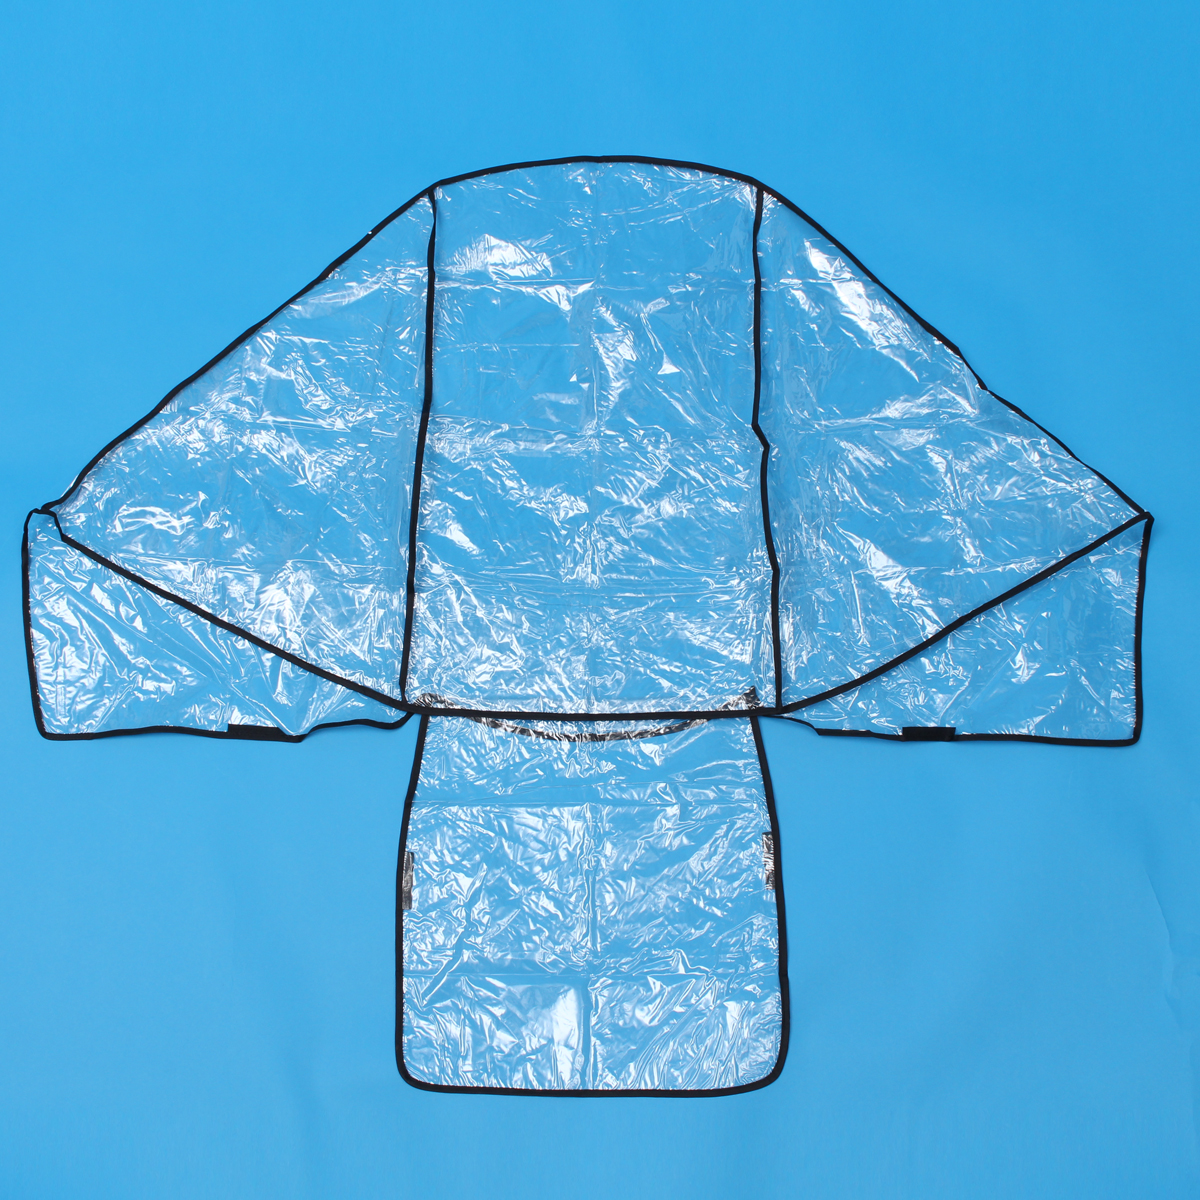 Clear-Stroller-Rain-Cover-Weather-Pram-Baby-Infant-Double-Pushchair-Wind-Shield-Raincoat-1294265